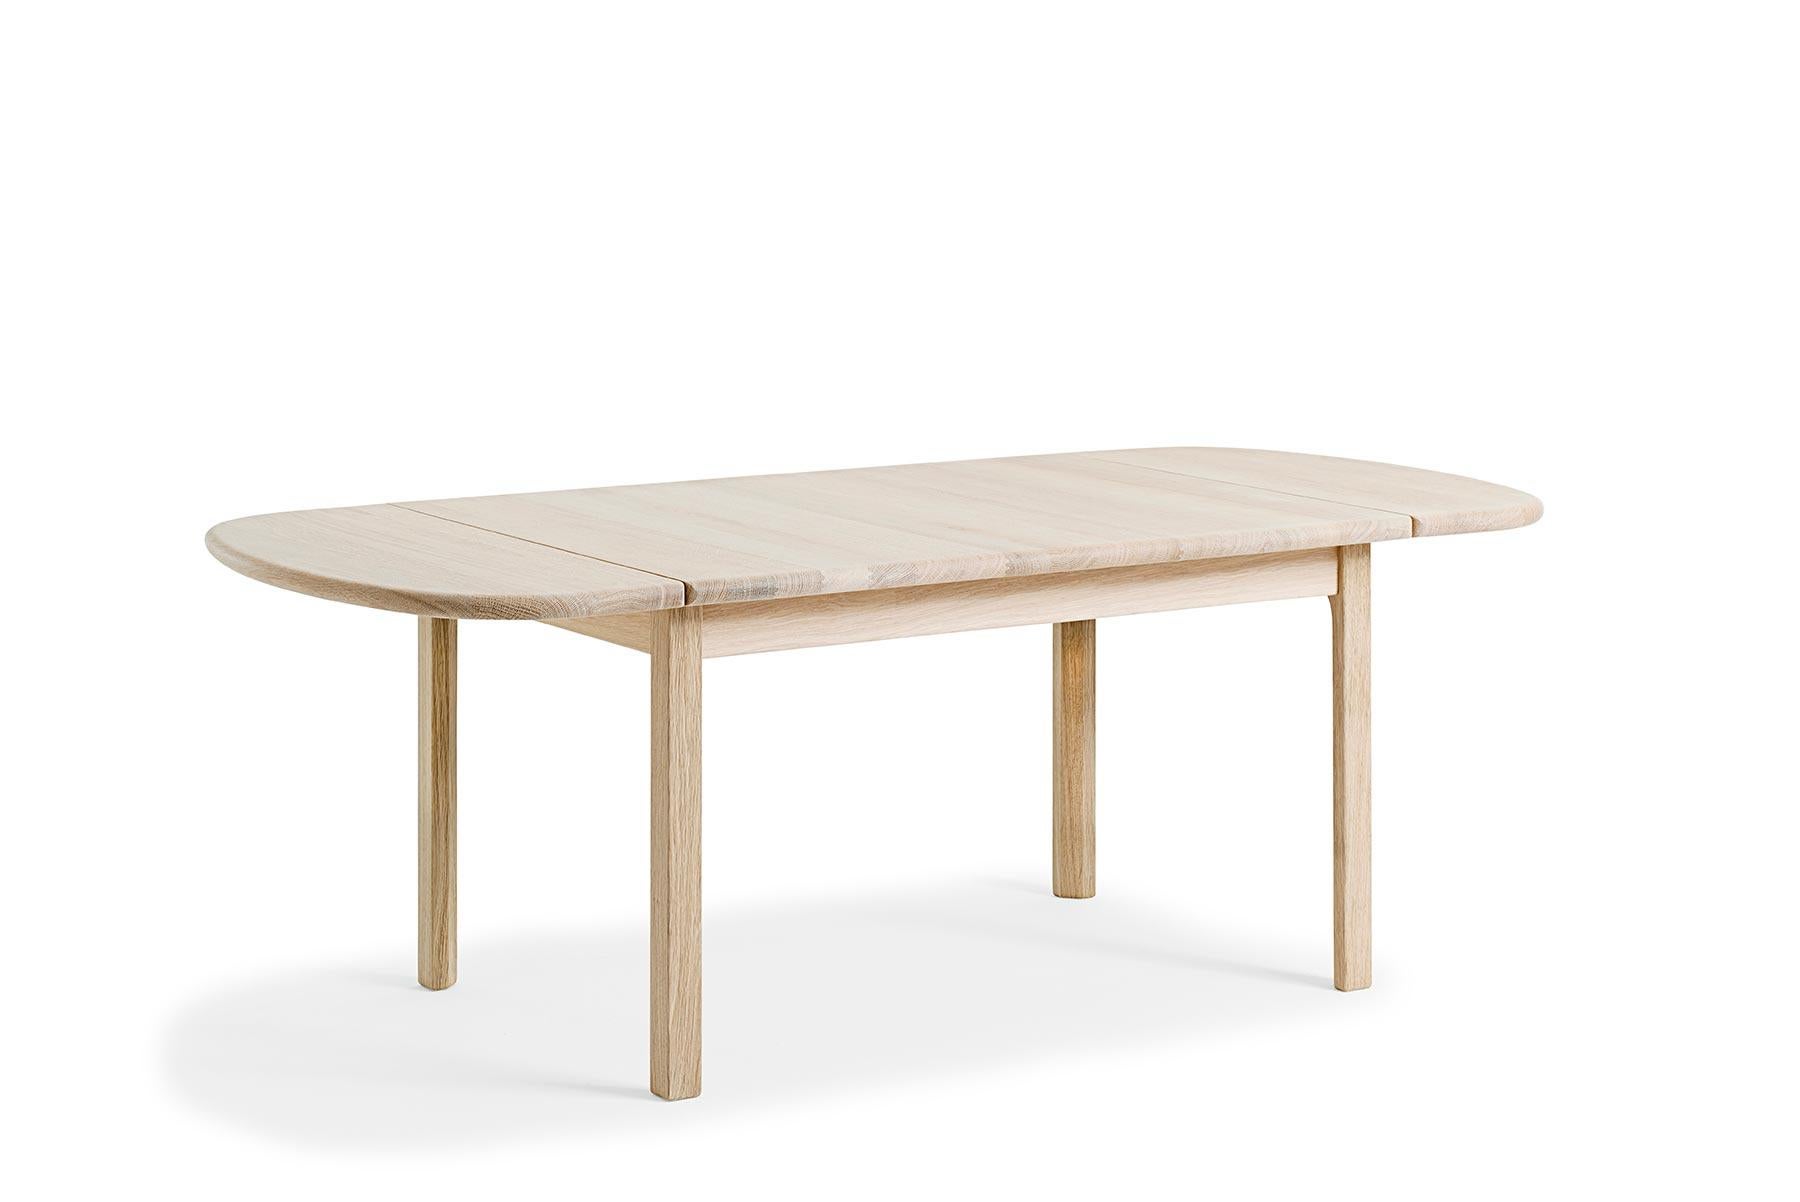 Hans Wegner GE, 82/85 Coffee Table, Stained Beech In Excellent Condition For Sale In Berkeley, CA